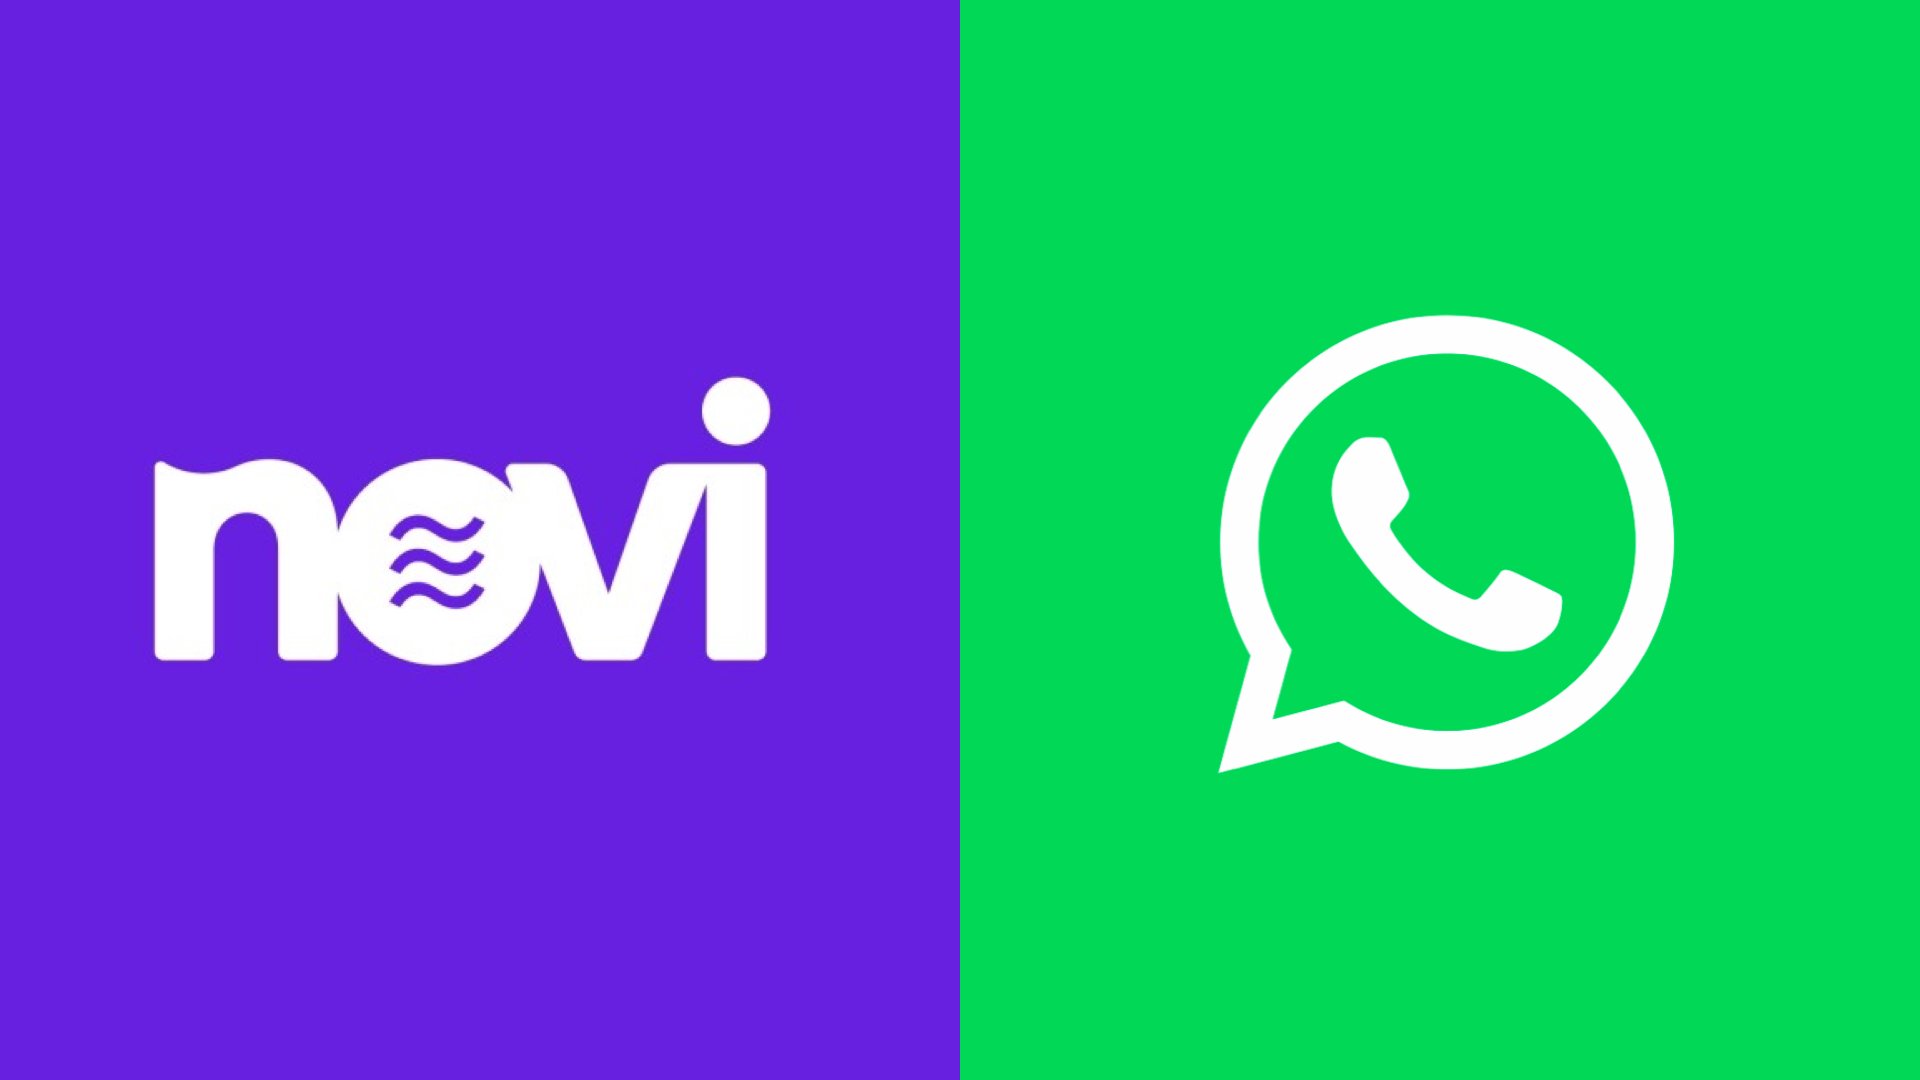 WhatsApp has experimented with Meta's Novi wallet for currency payments.